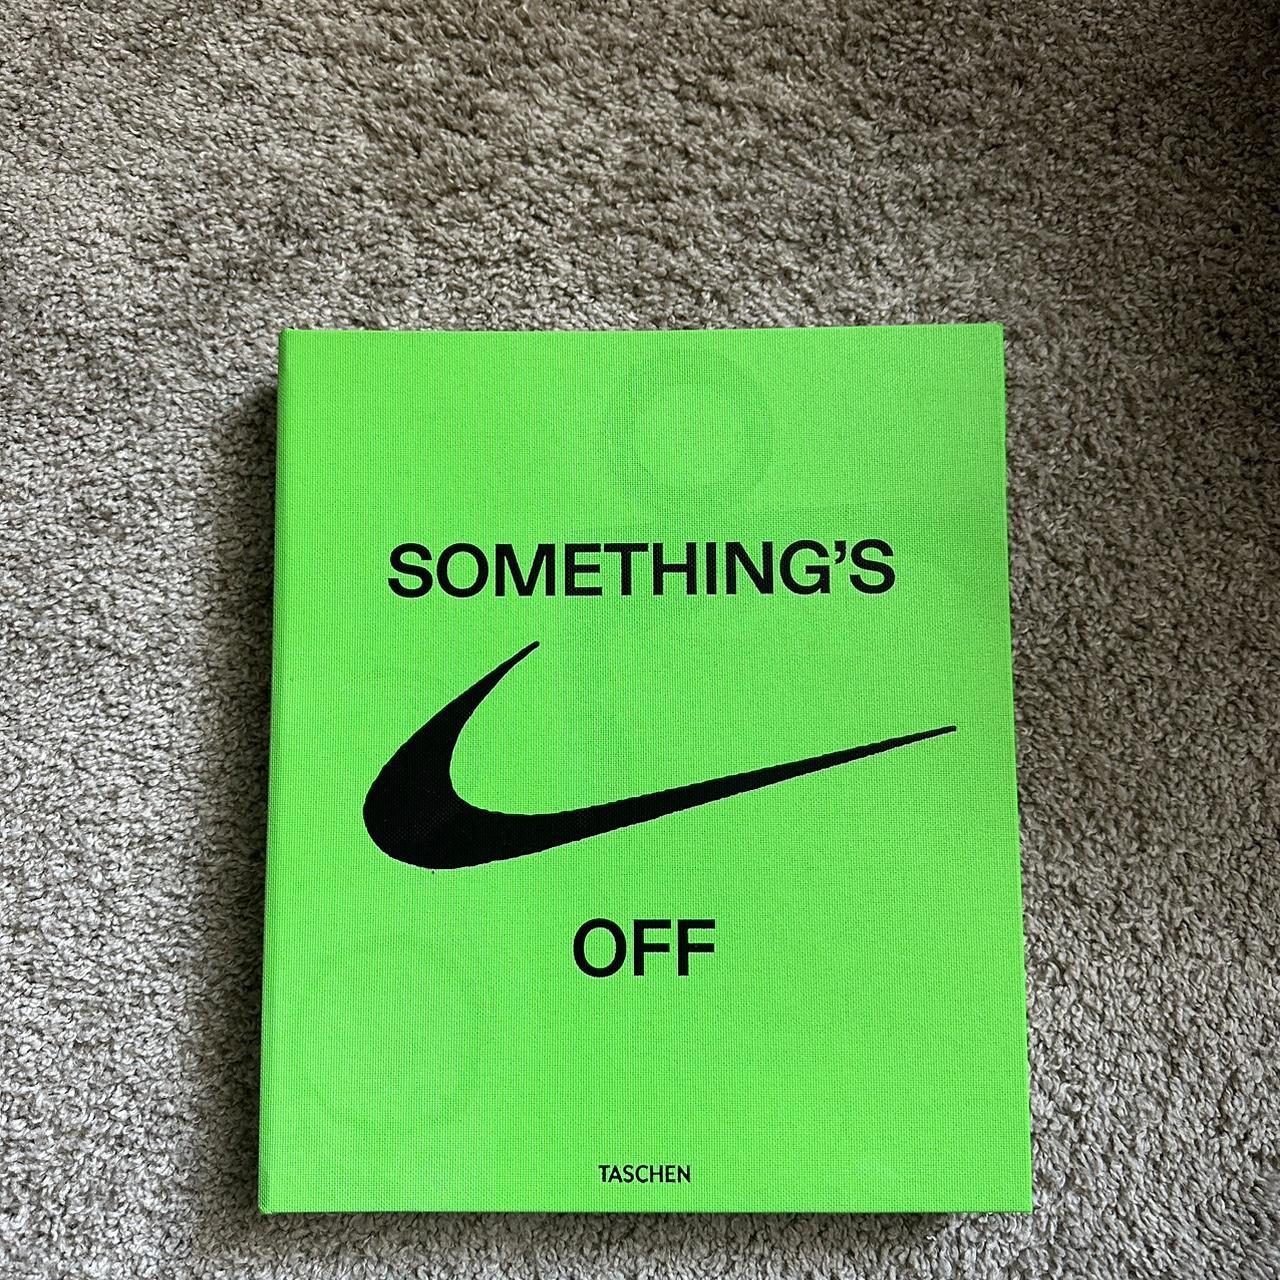 Off-White Green and Black Books | Depop